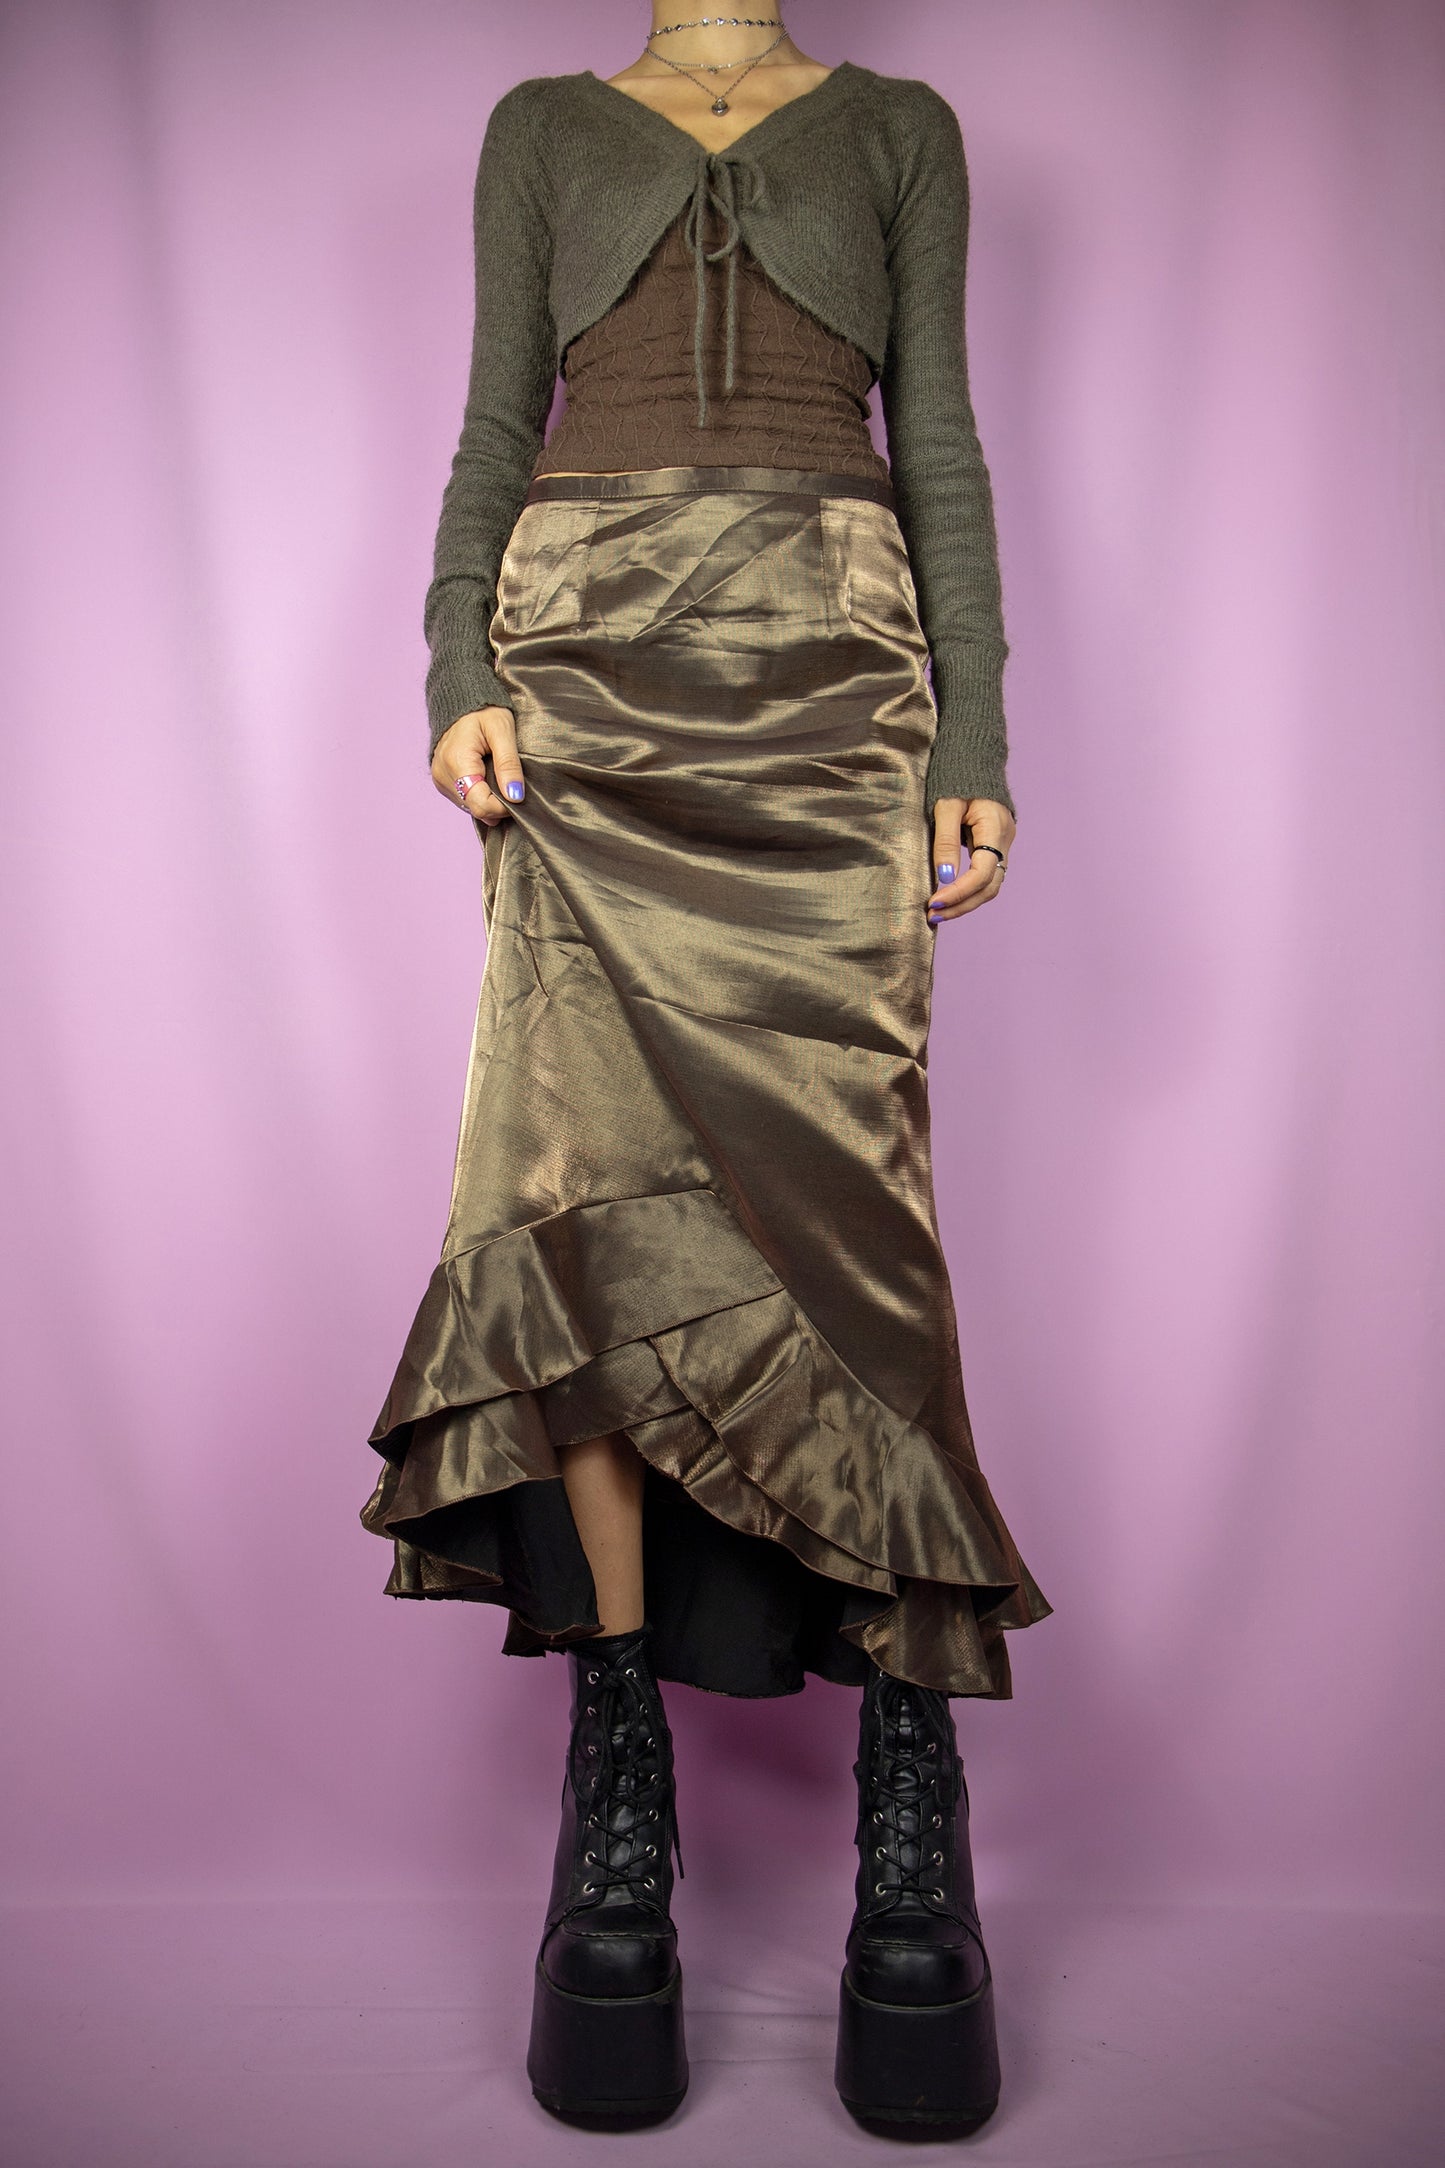 The Vintage 90s Brown Mermaid Midi Skirt is a greenish-brown iridescent skirt with a tulip-style ruffled hem and a back zipper closure.</span> Romantic avant garde 1990s party night maxi skirt.